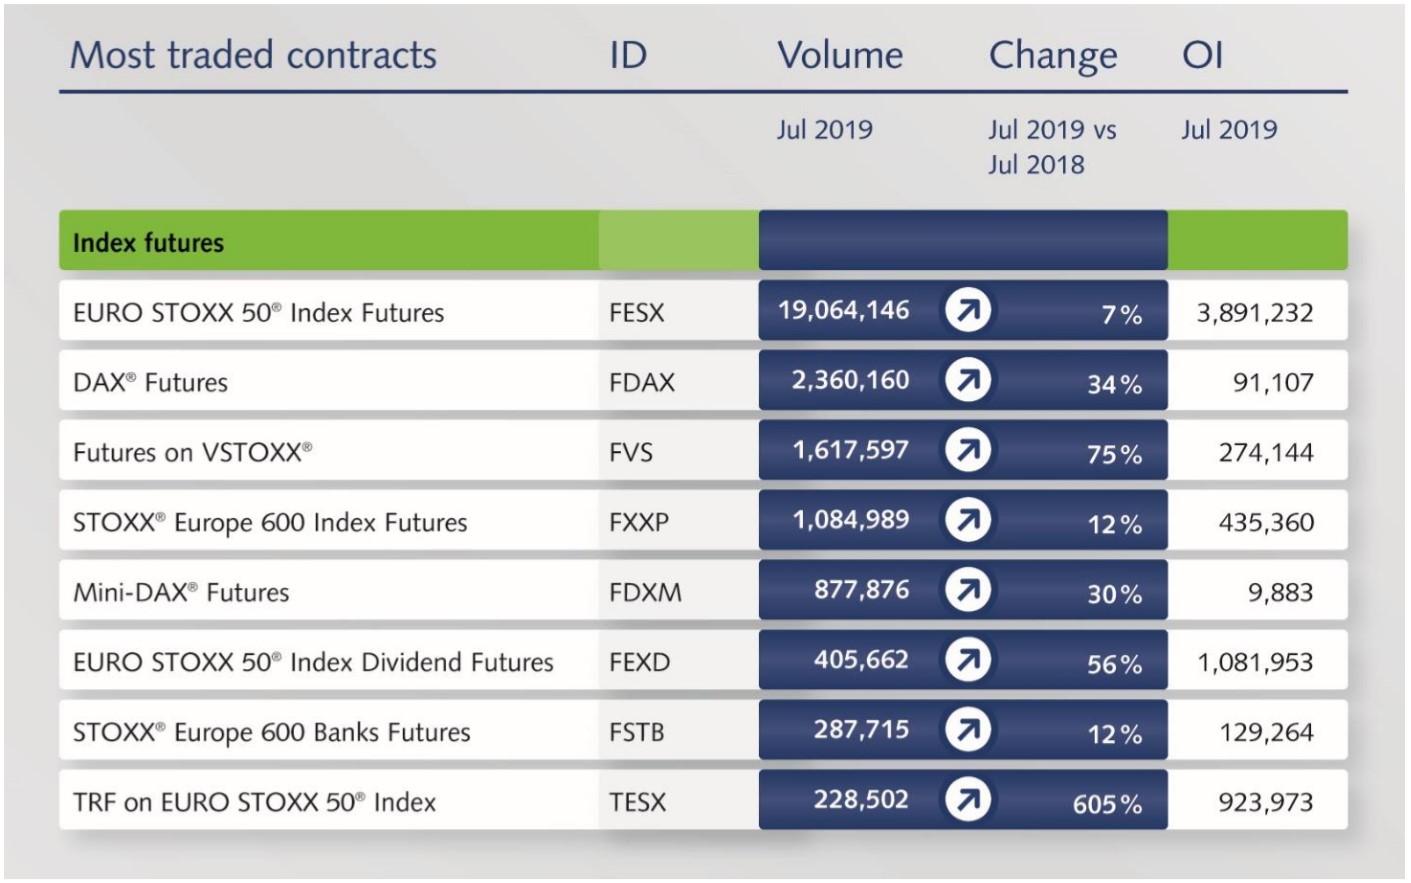 Chart showing details of most traded contracts: name, ID, volume for July 2019, change July 2018 vs July 2019, and OI July 2019 